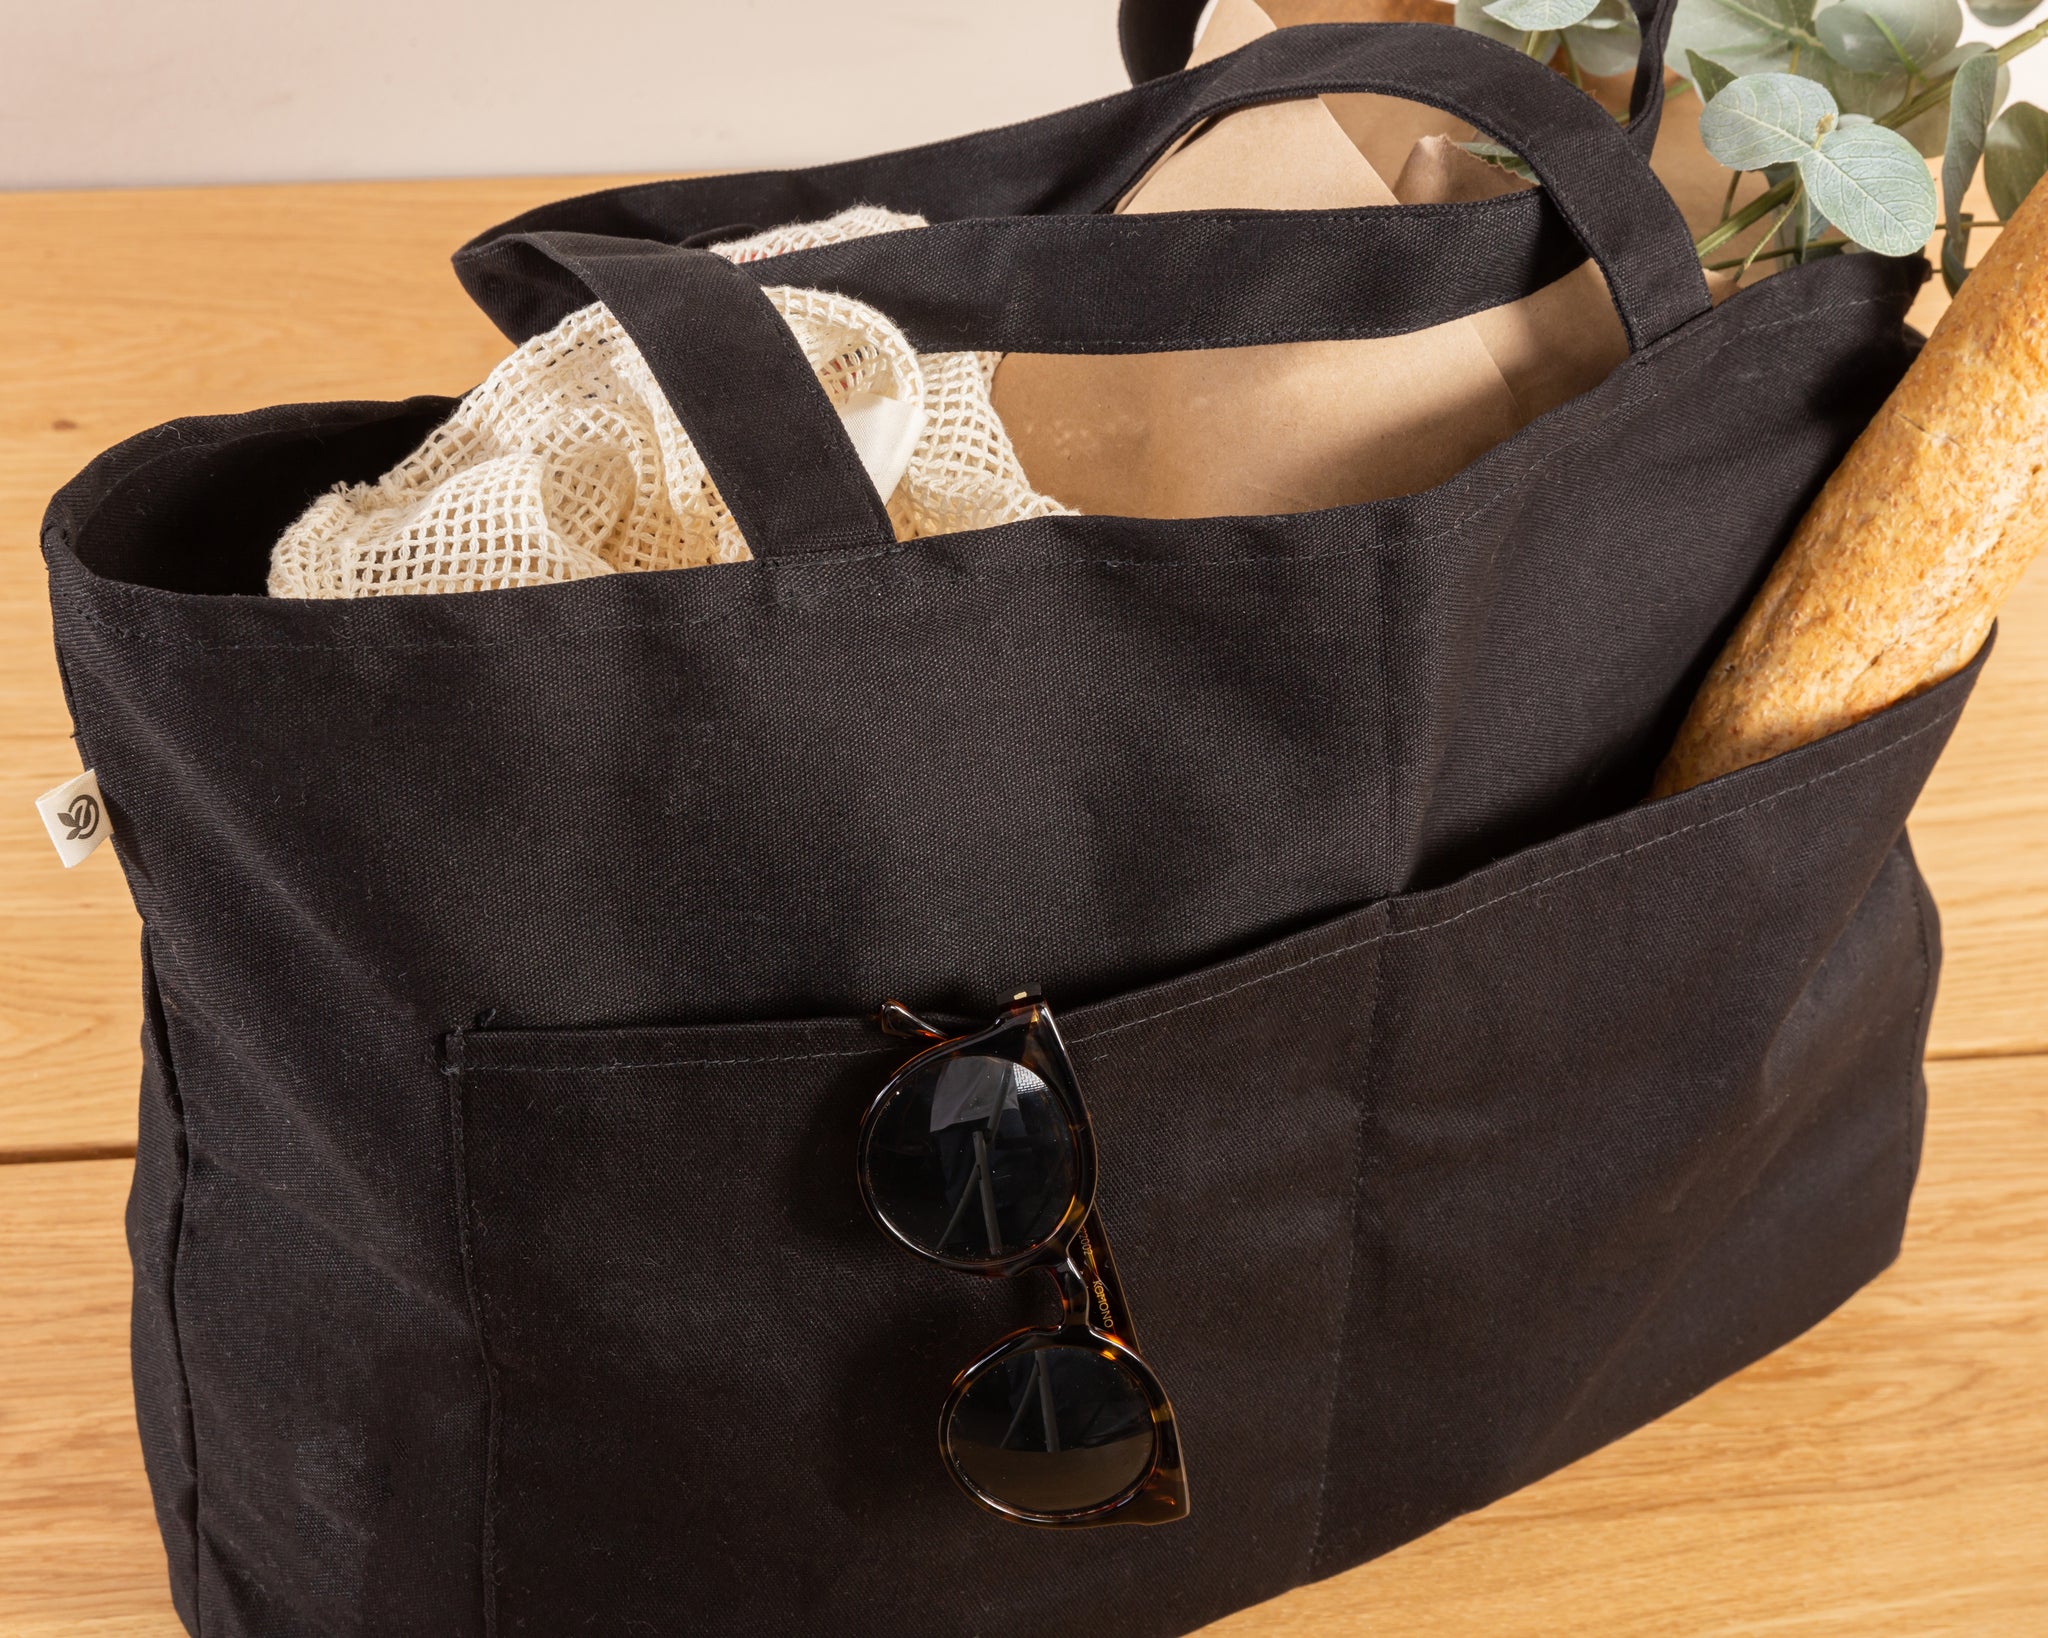 EVERYDAY CANVAS TOTE WITH POCKETS | Planet E .